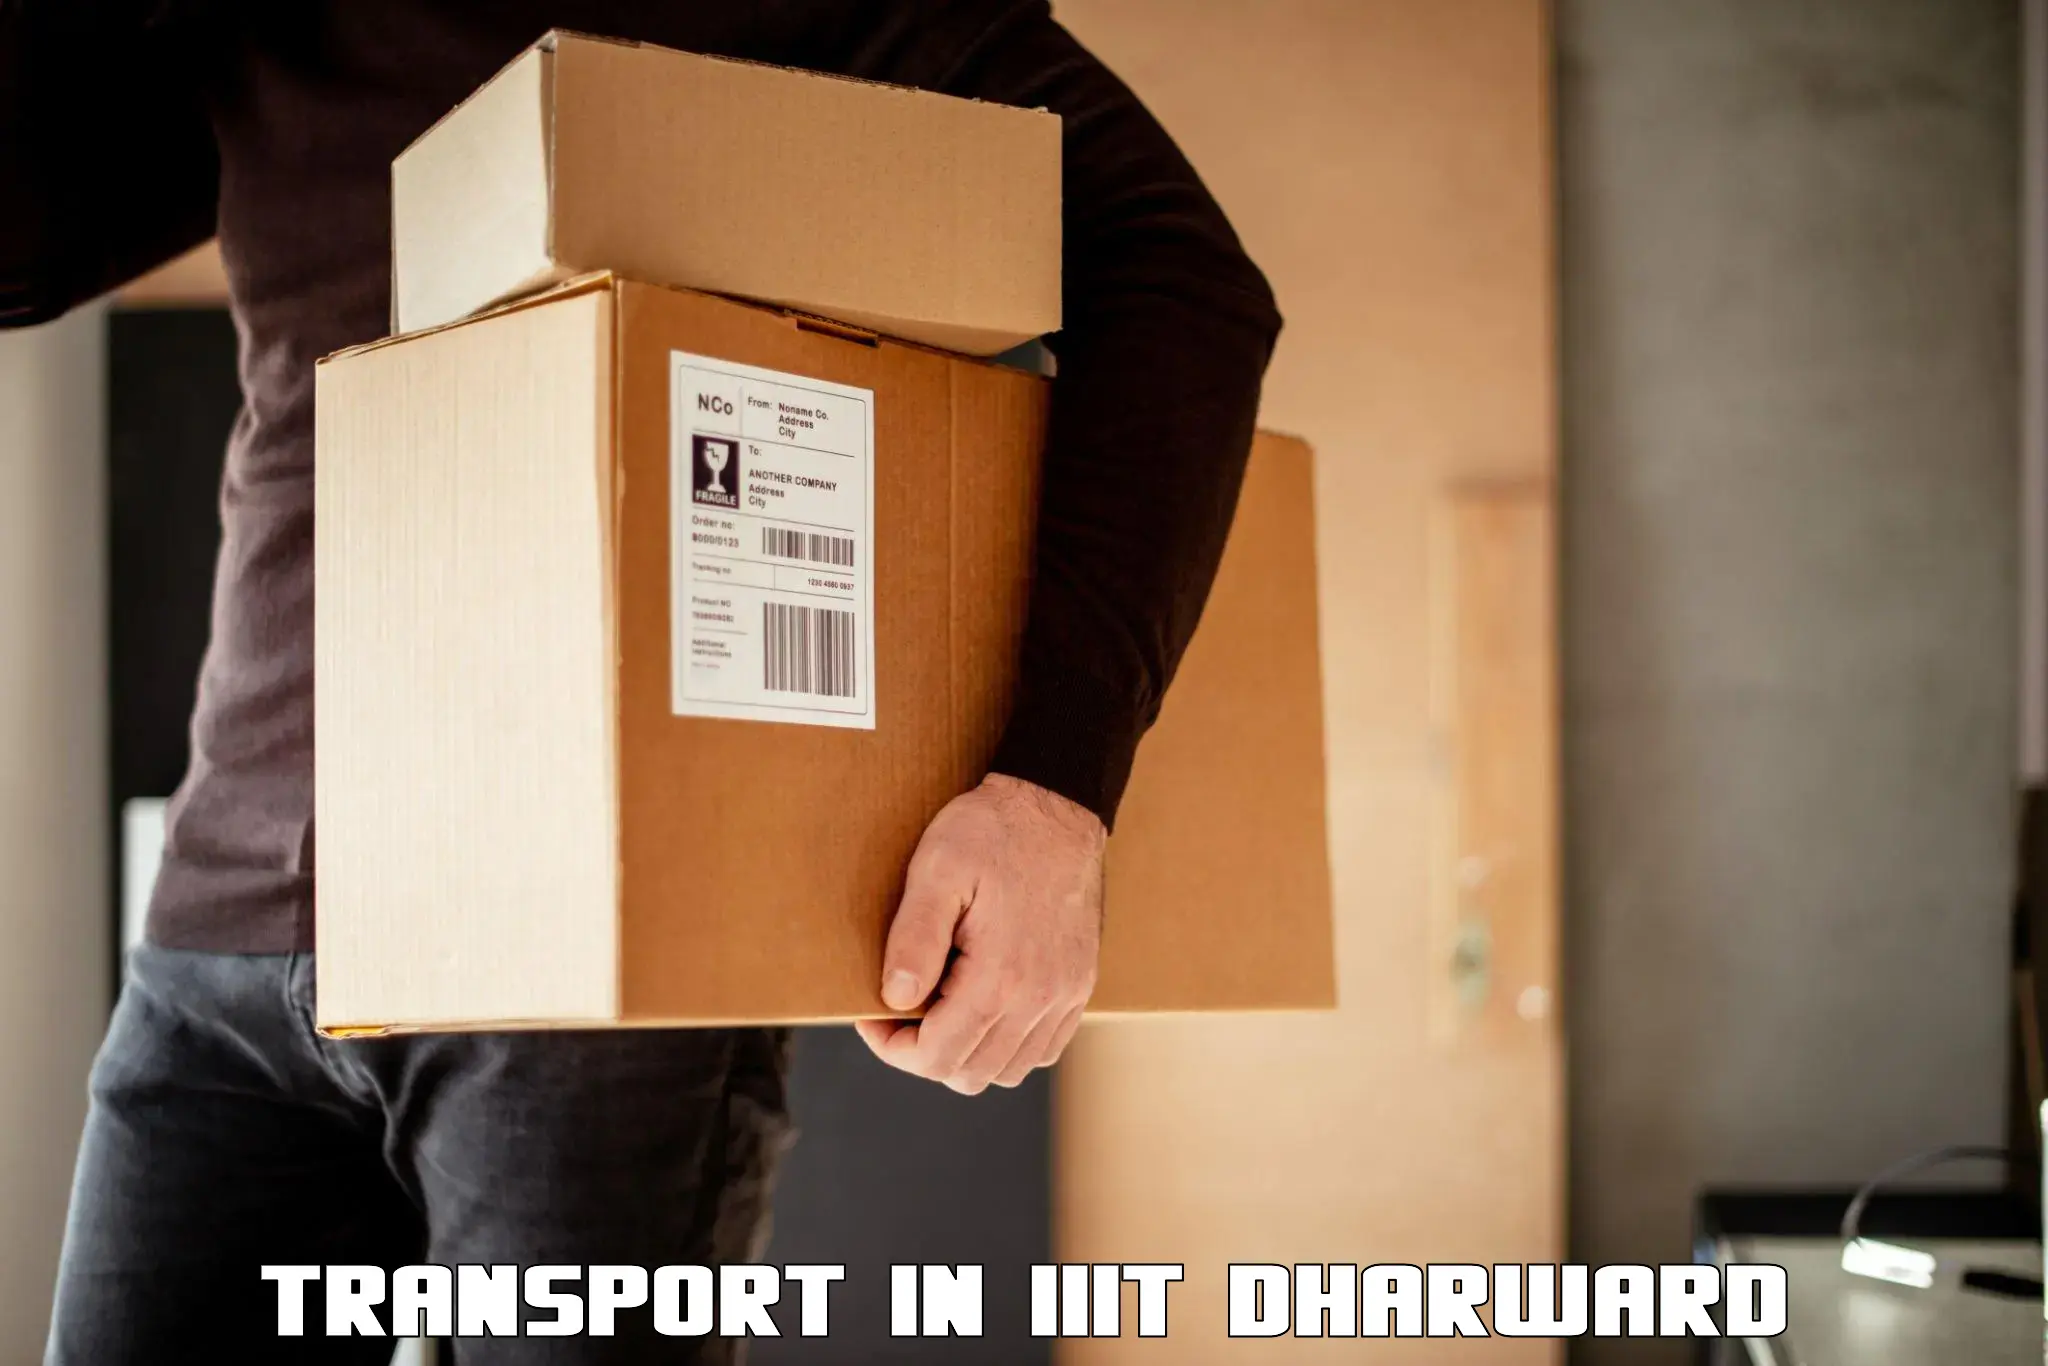 Express transport services in IIIT Dharward